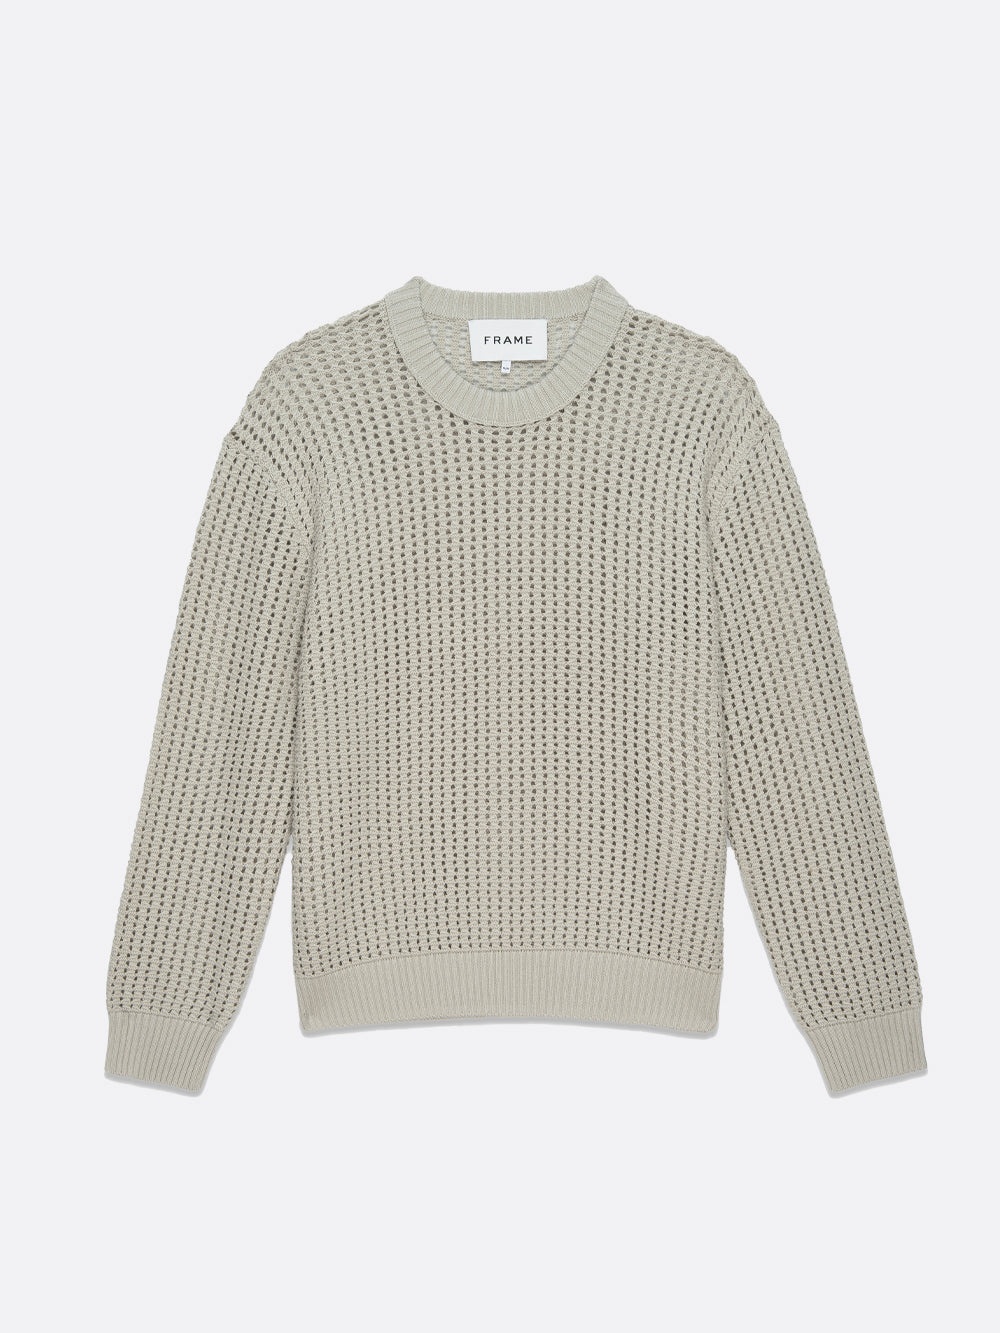 Cotton Blend Crewneck Sweater in Mineral Grey - 1